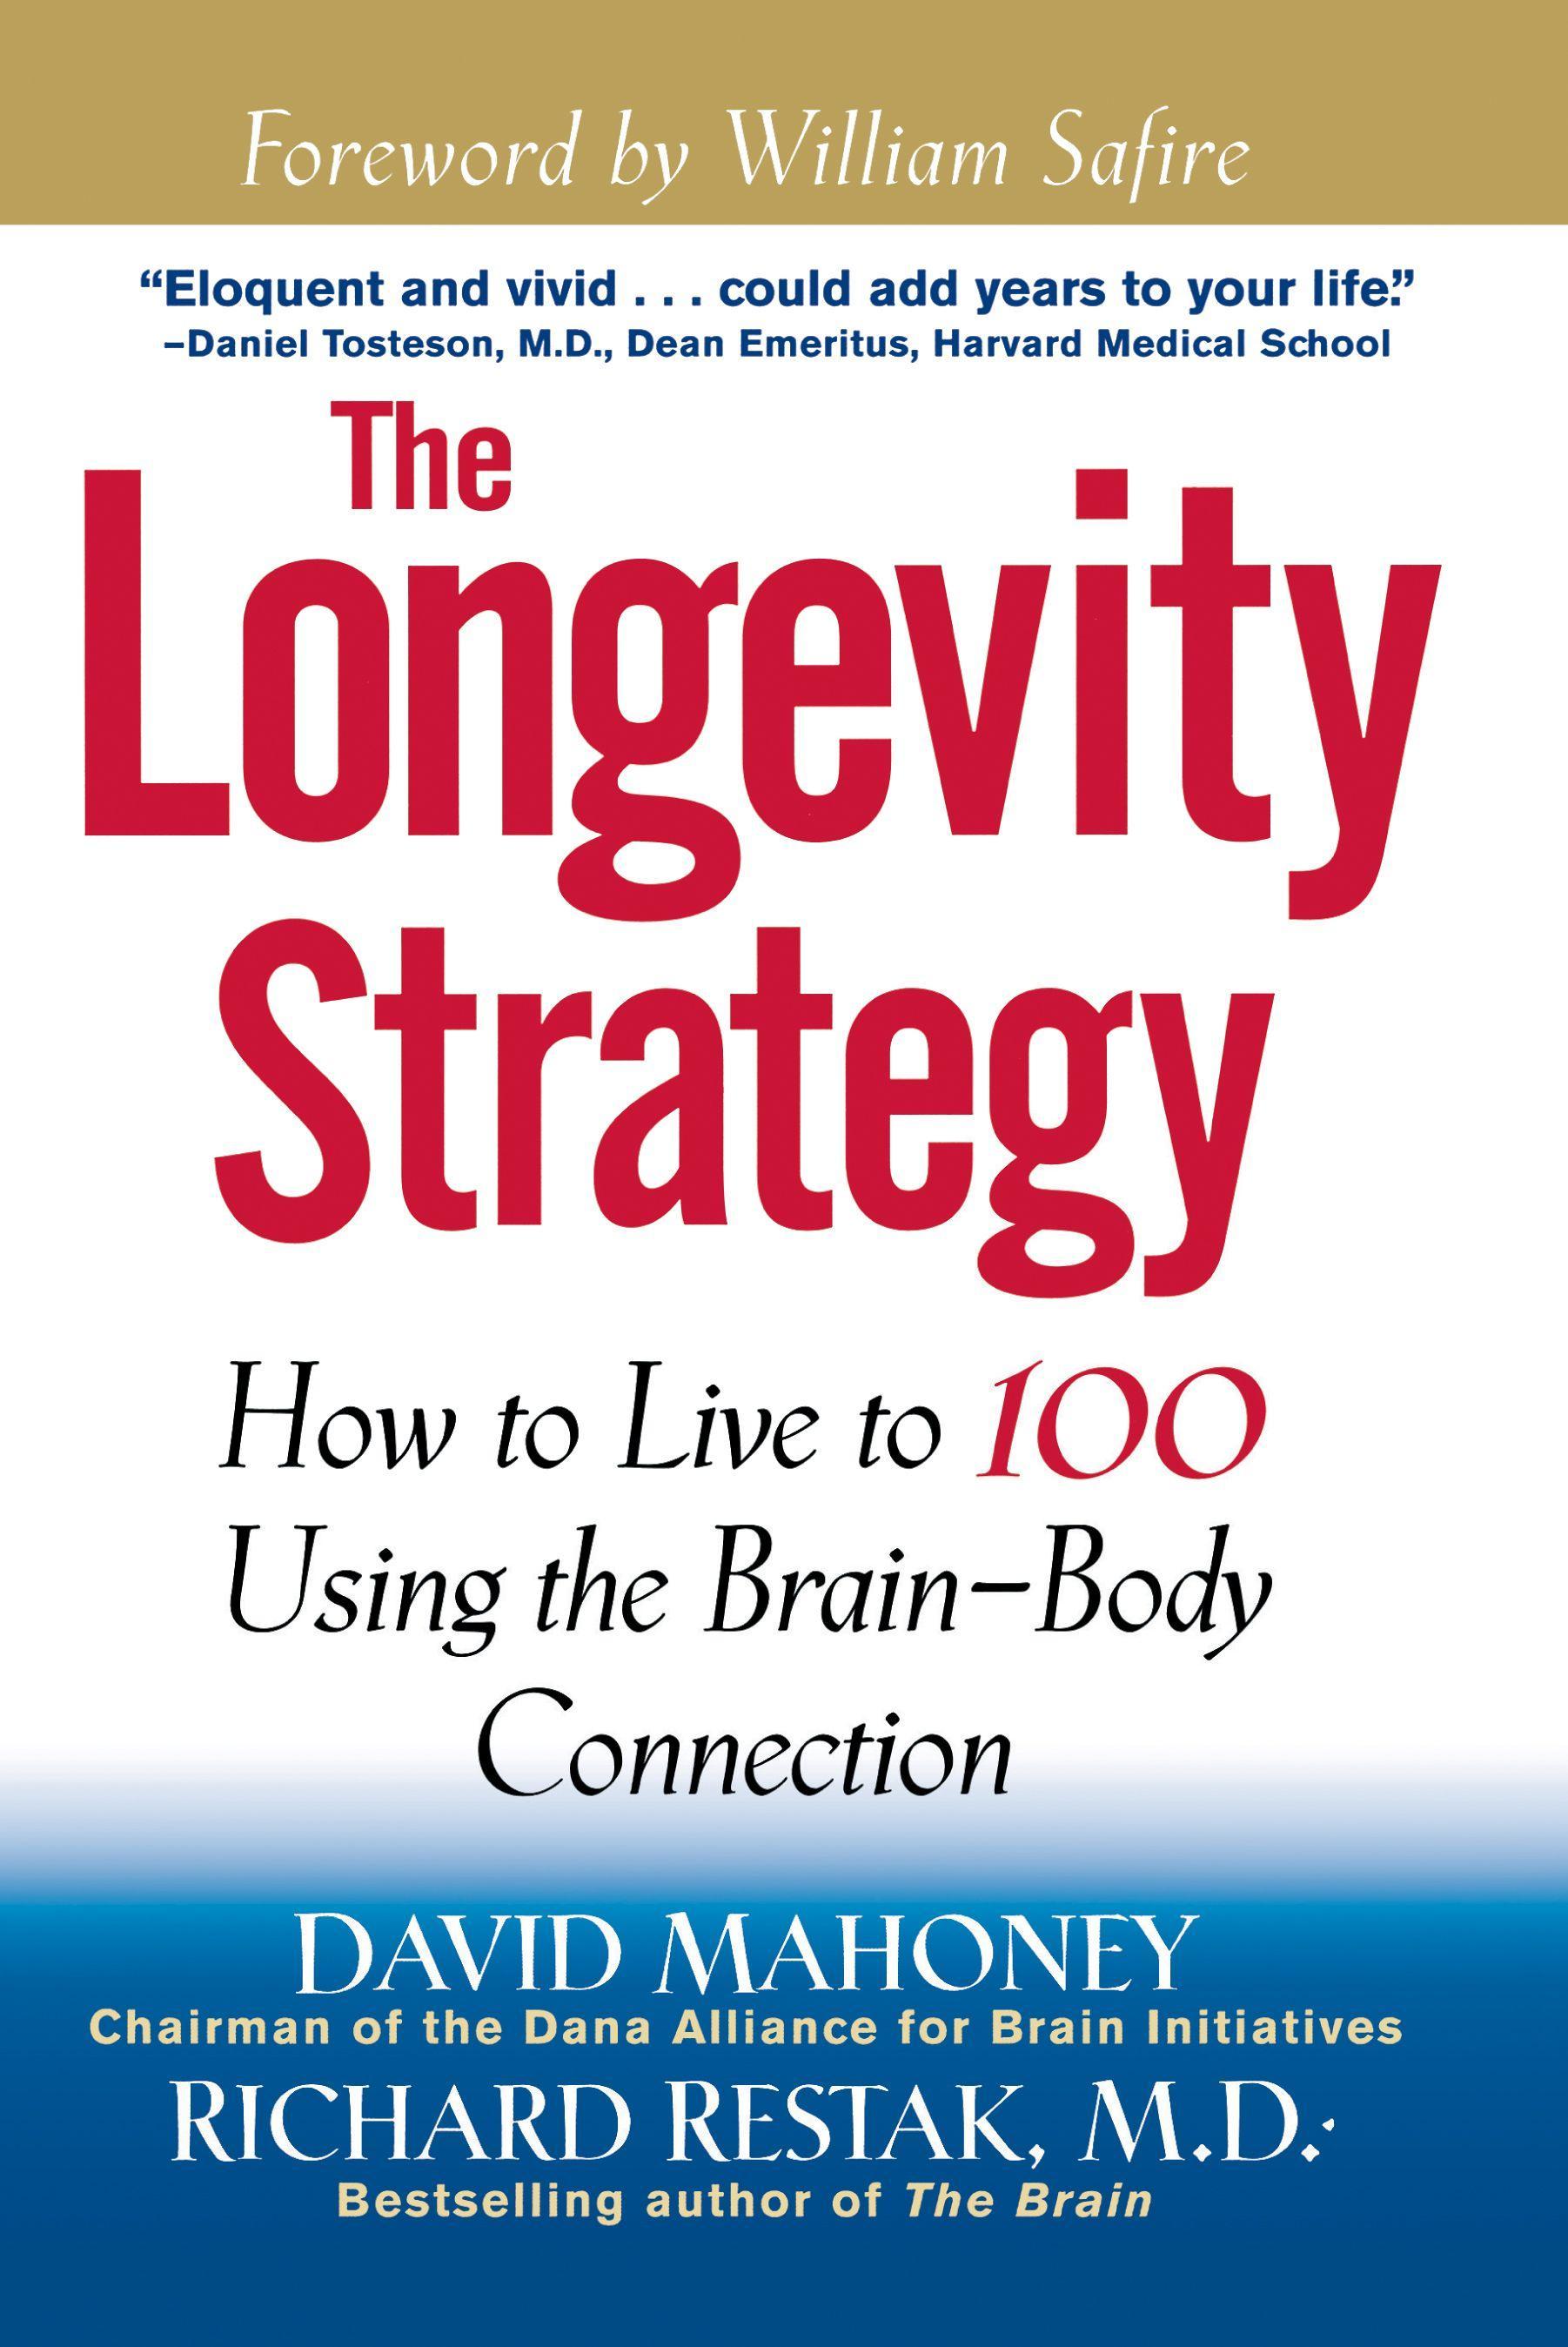 The Longevity Strategy: How to Live to 100 Using the Brain-Body Connection - Mahoney, David